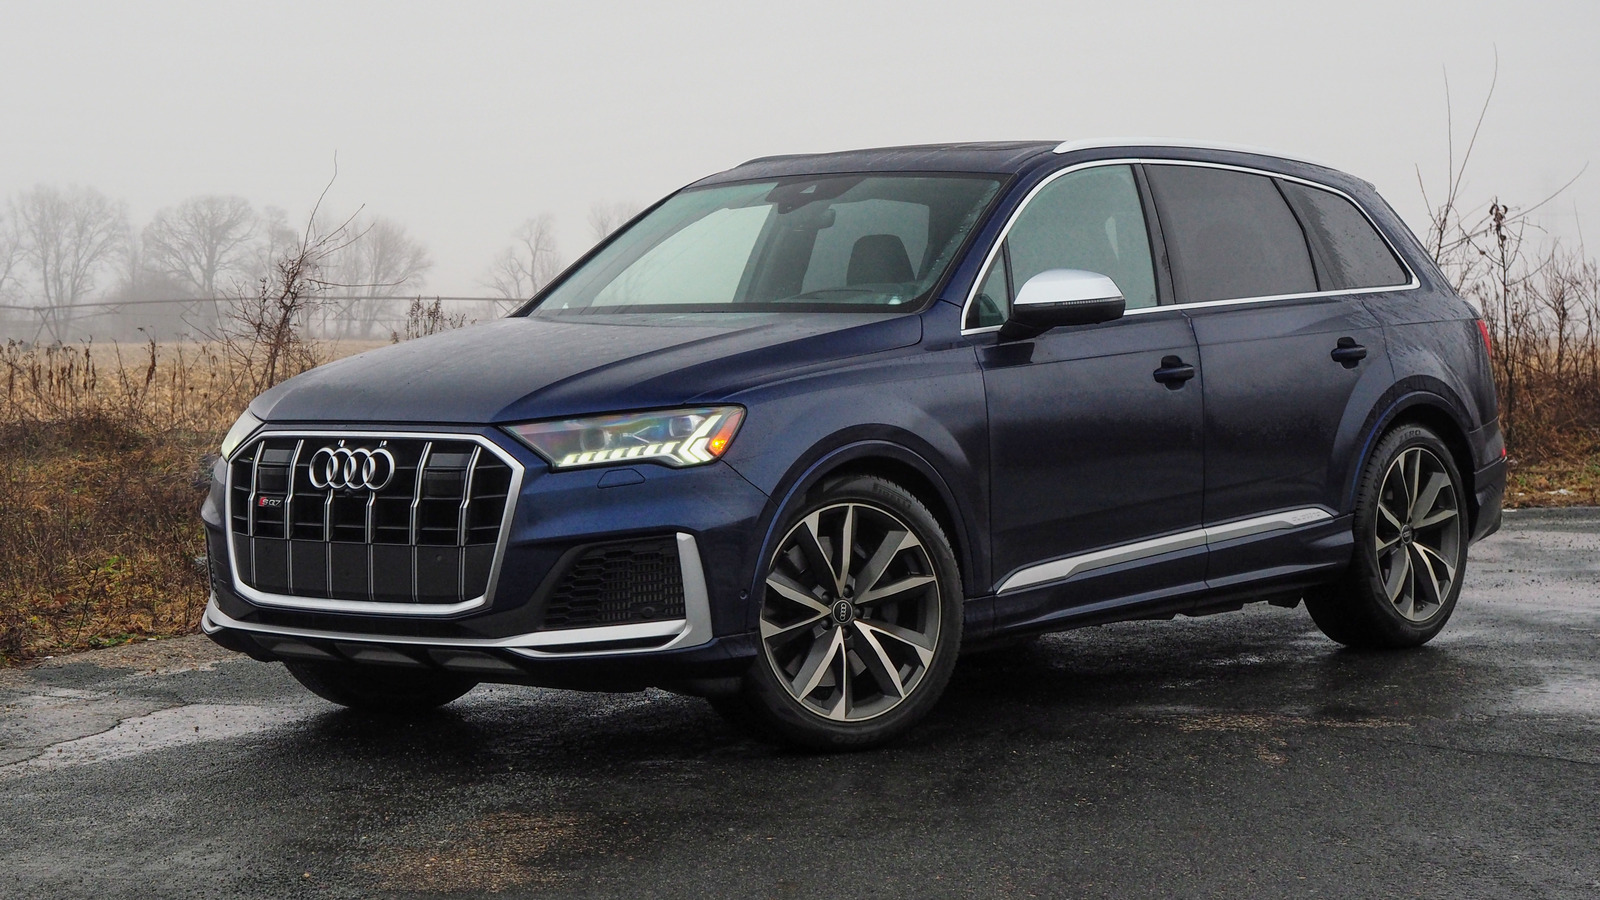 Car Review: Audi's Q7 brings power and luxury in a 3-row SUV